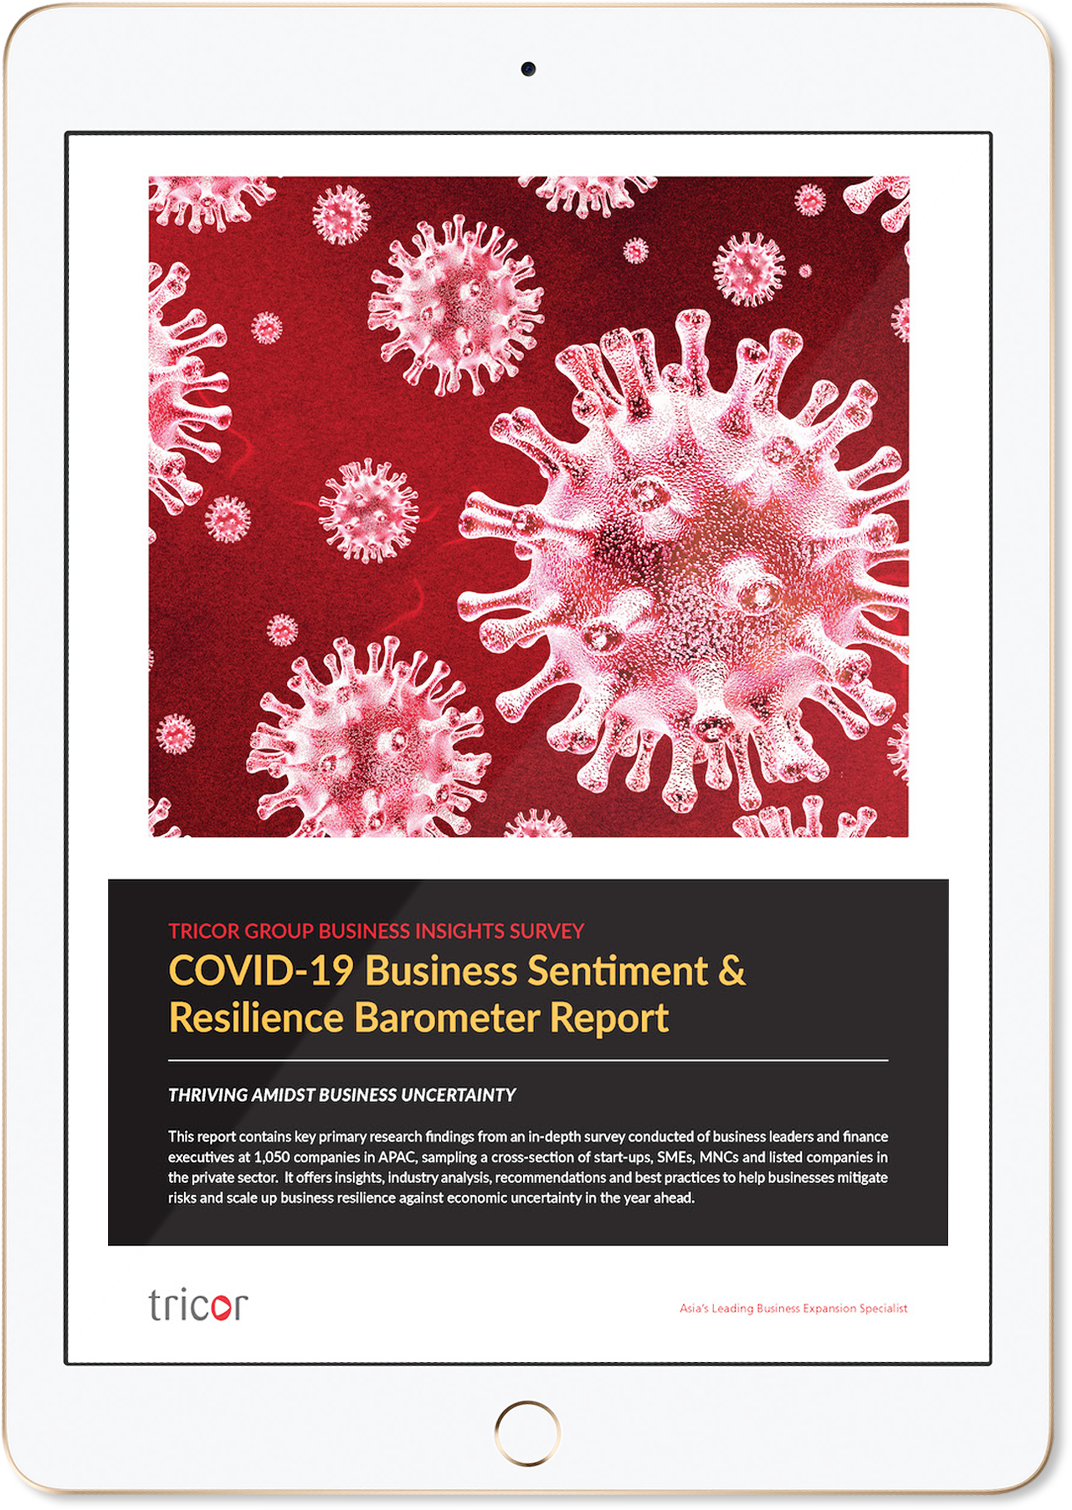 COVID-19 Business Sentiment & Resilience Barometer Report